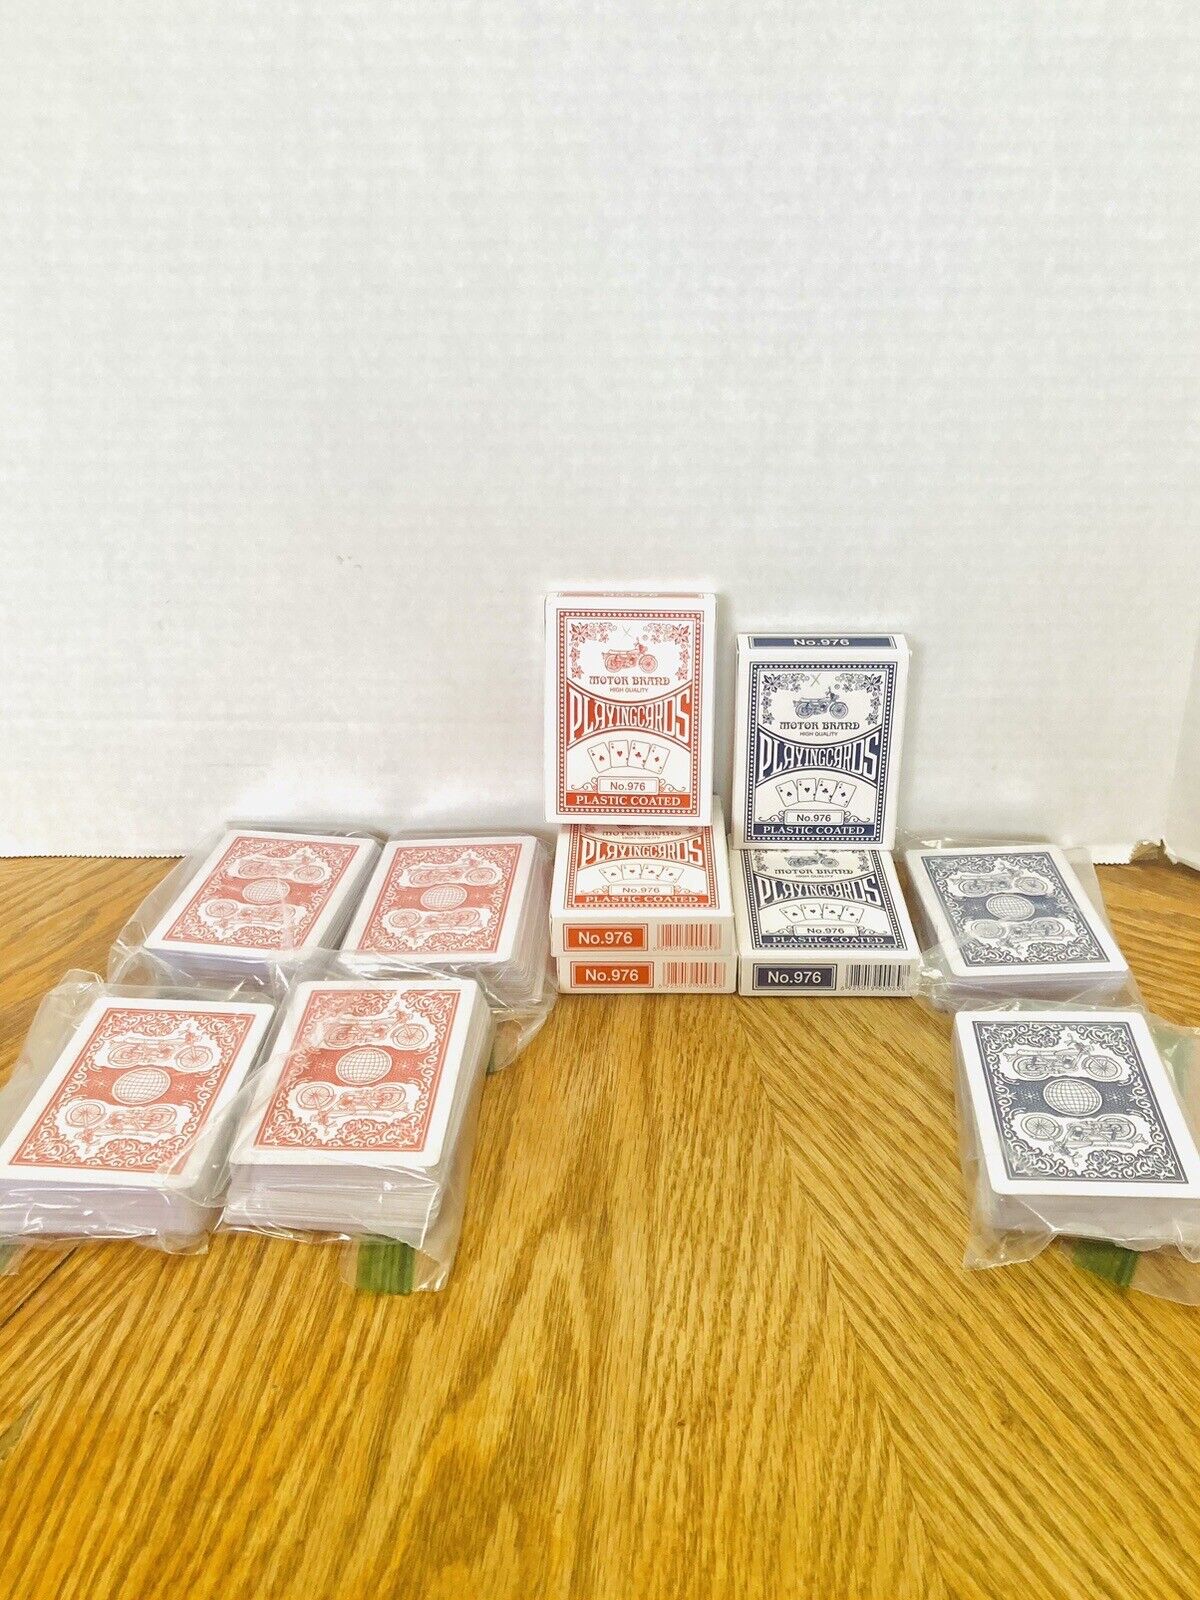 Motor Brand #976 Playing Cards Lot(11) 5 Have Box, Lotfancy Inc